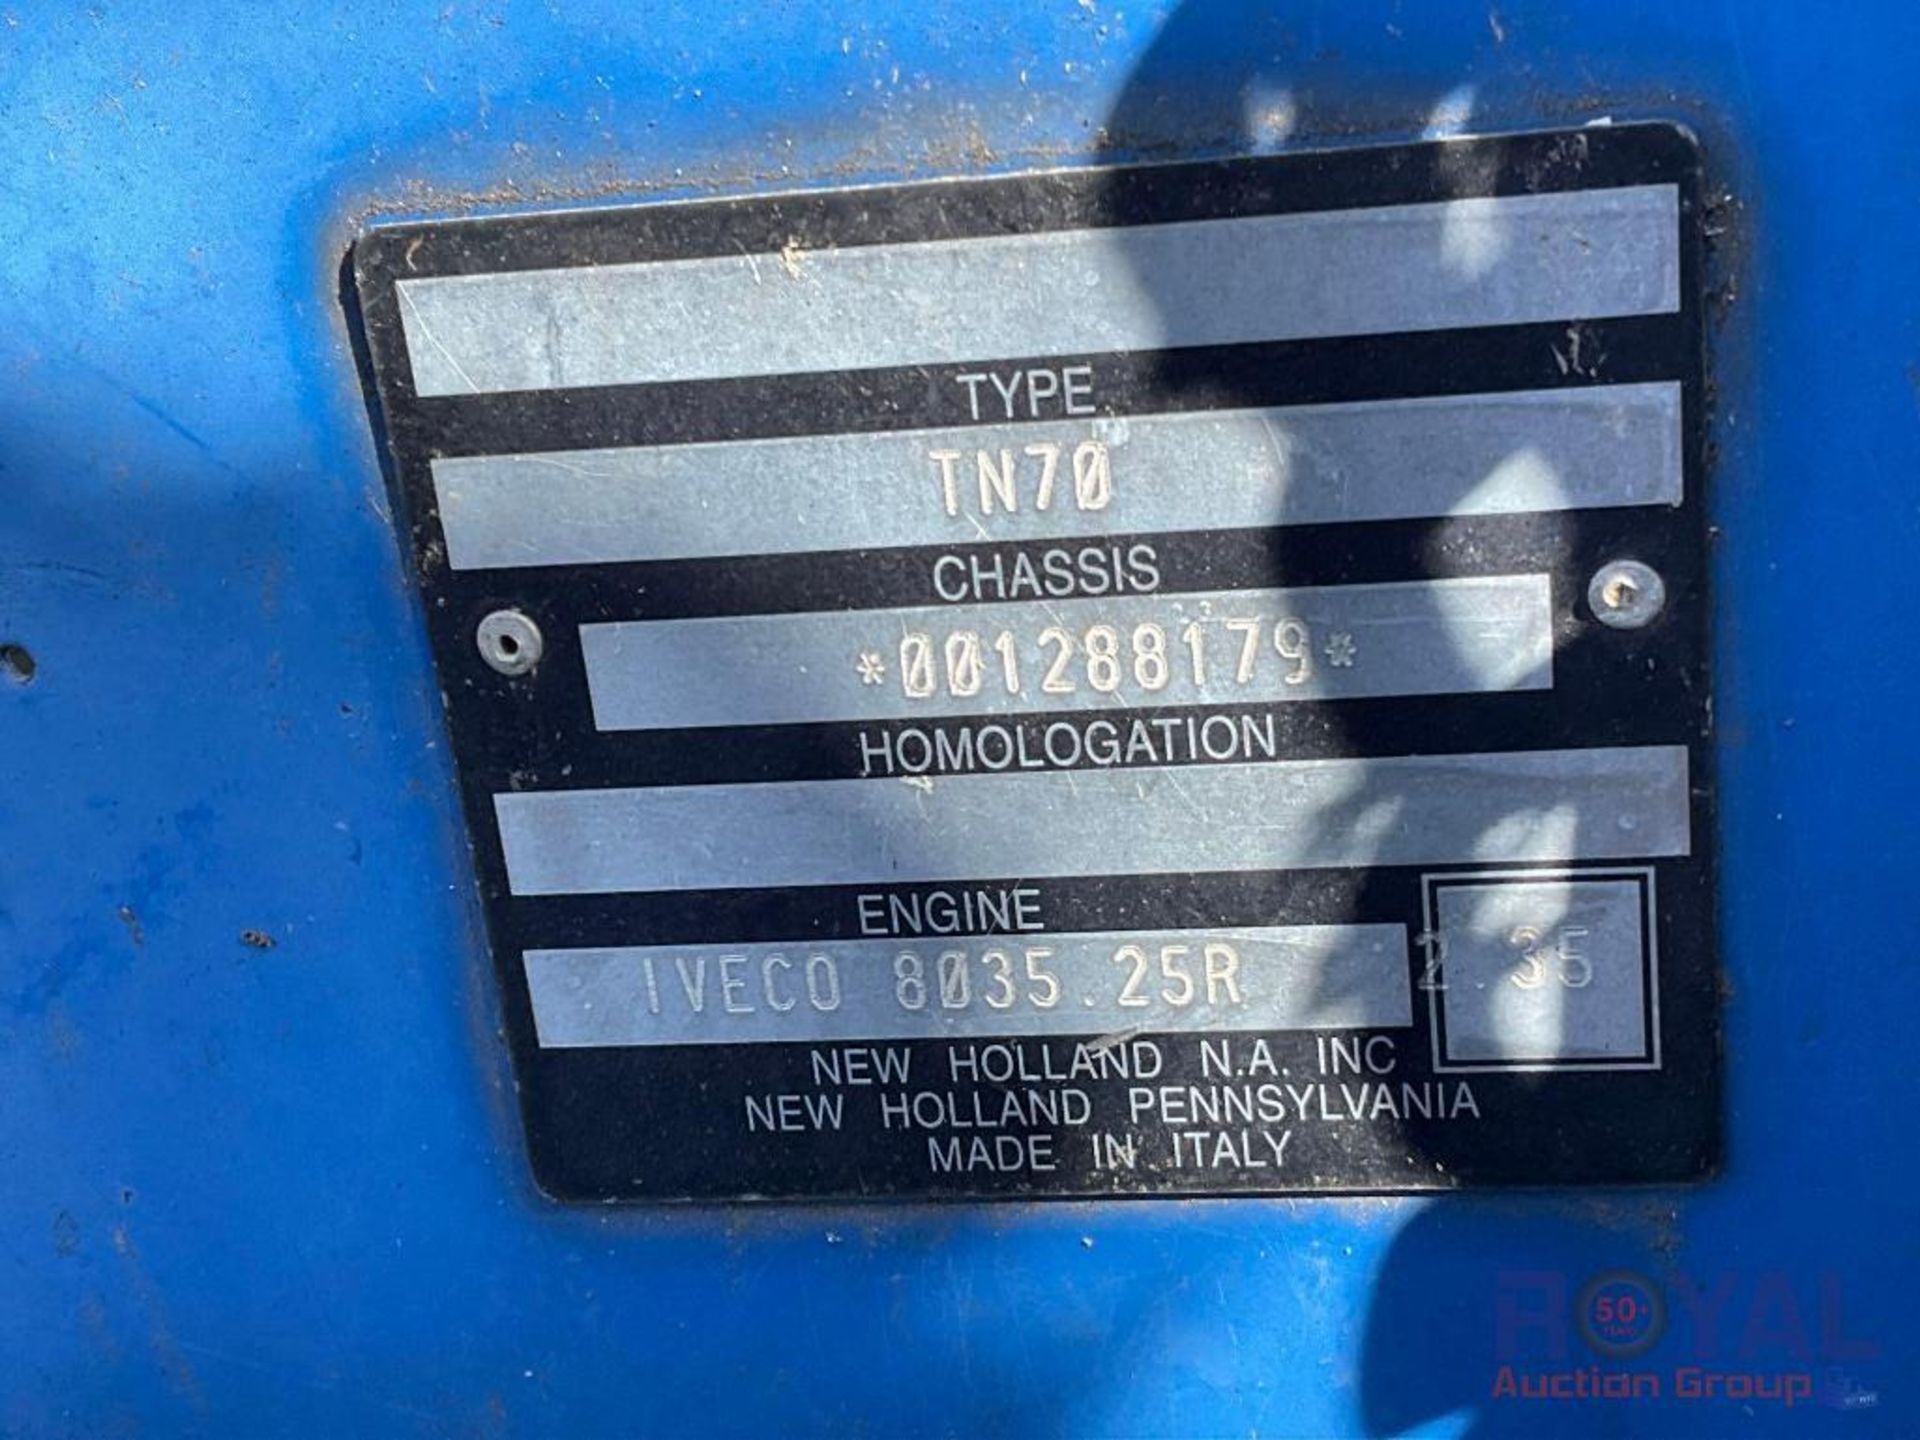 New Holland Model TN70 Tractor - Image 5 of 17